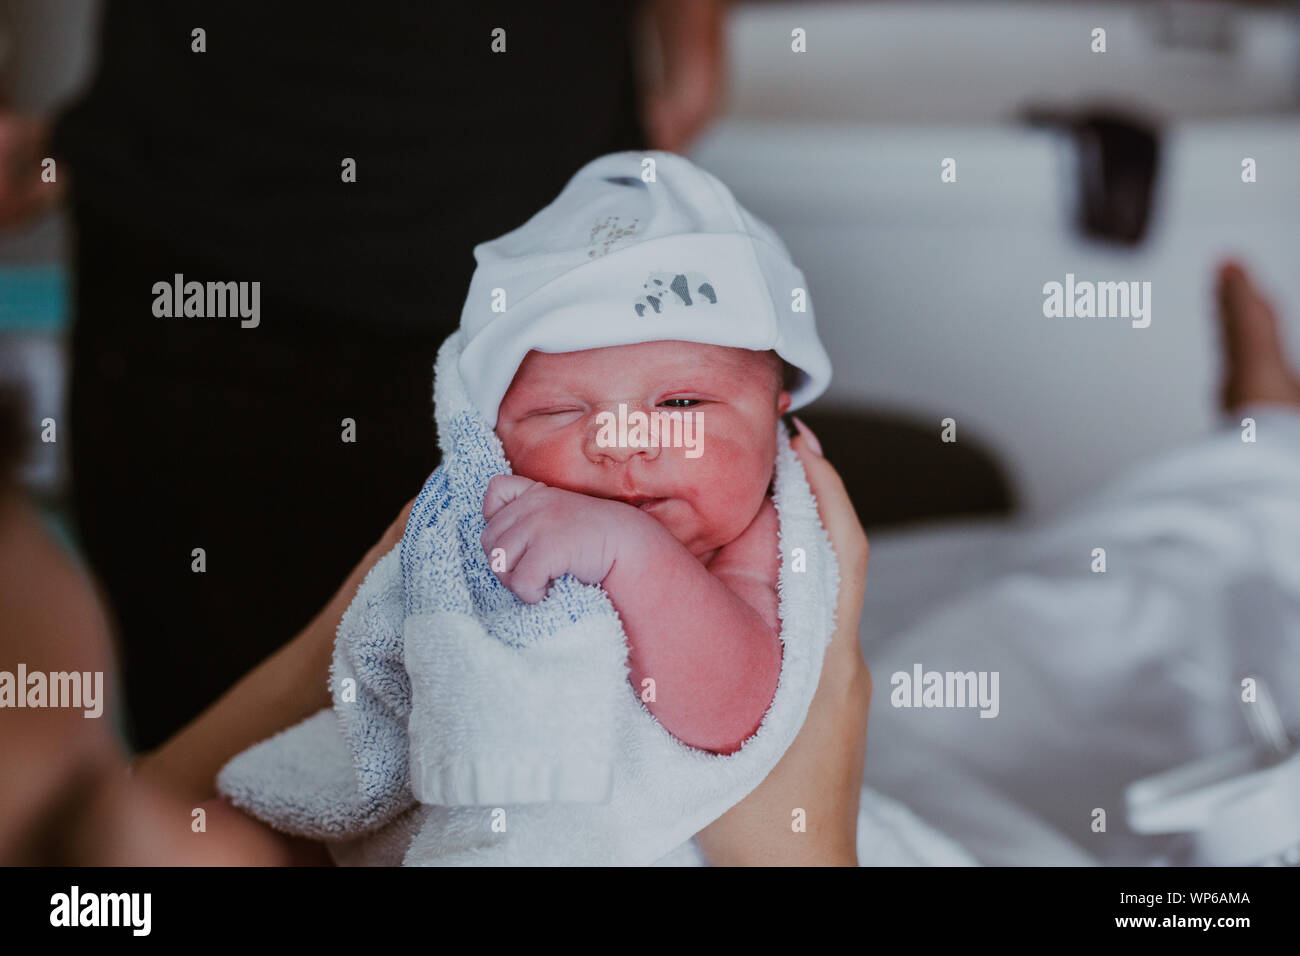 Authentic birth images, newborn baby being help by mother. Wearing a little white hat Stock Photo